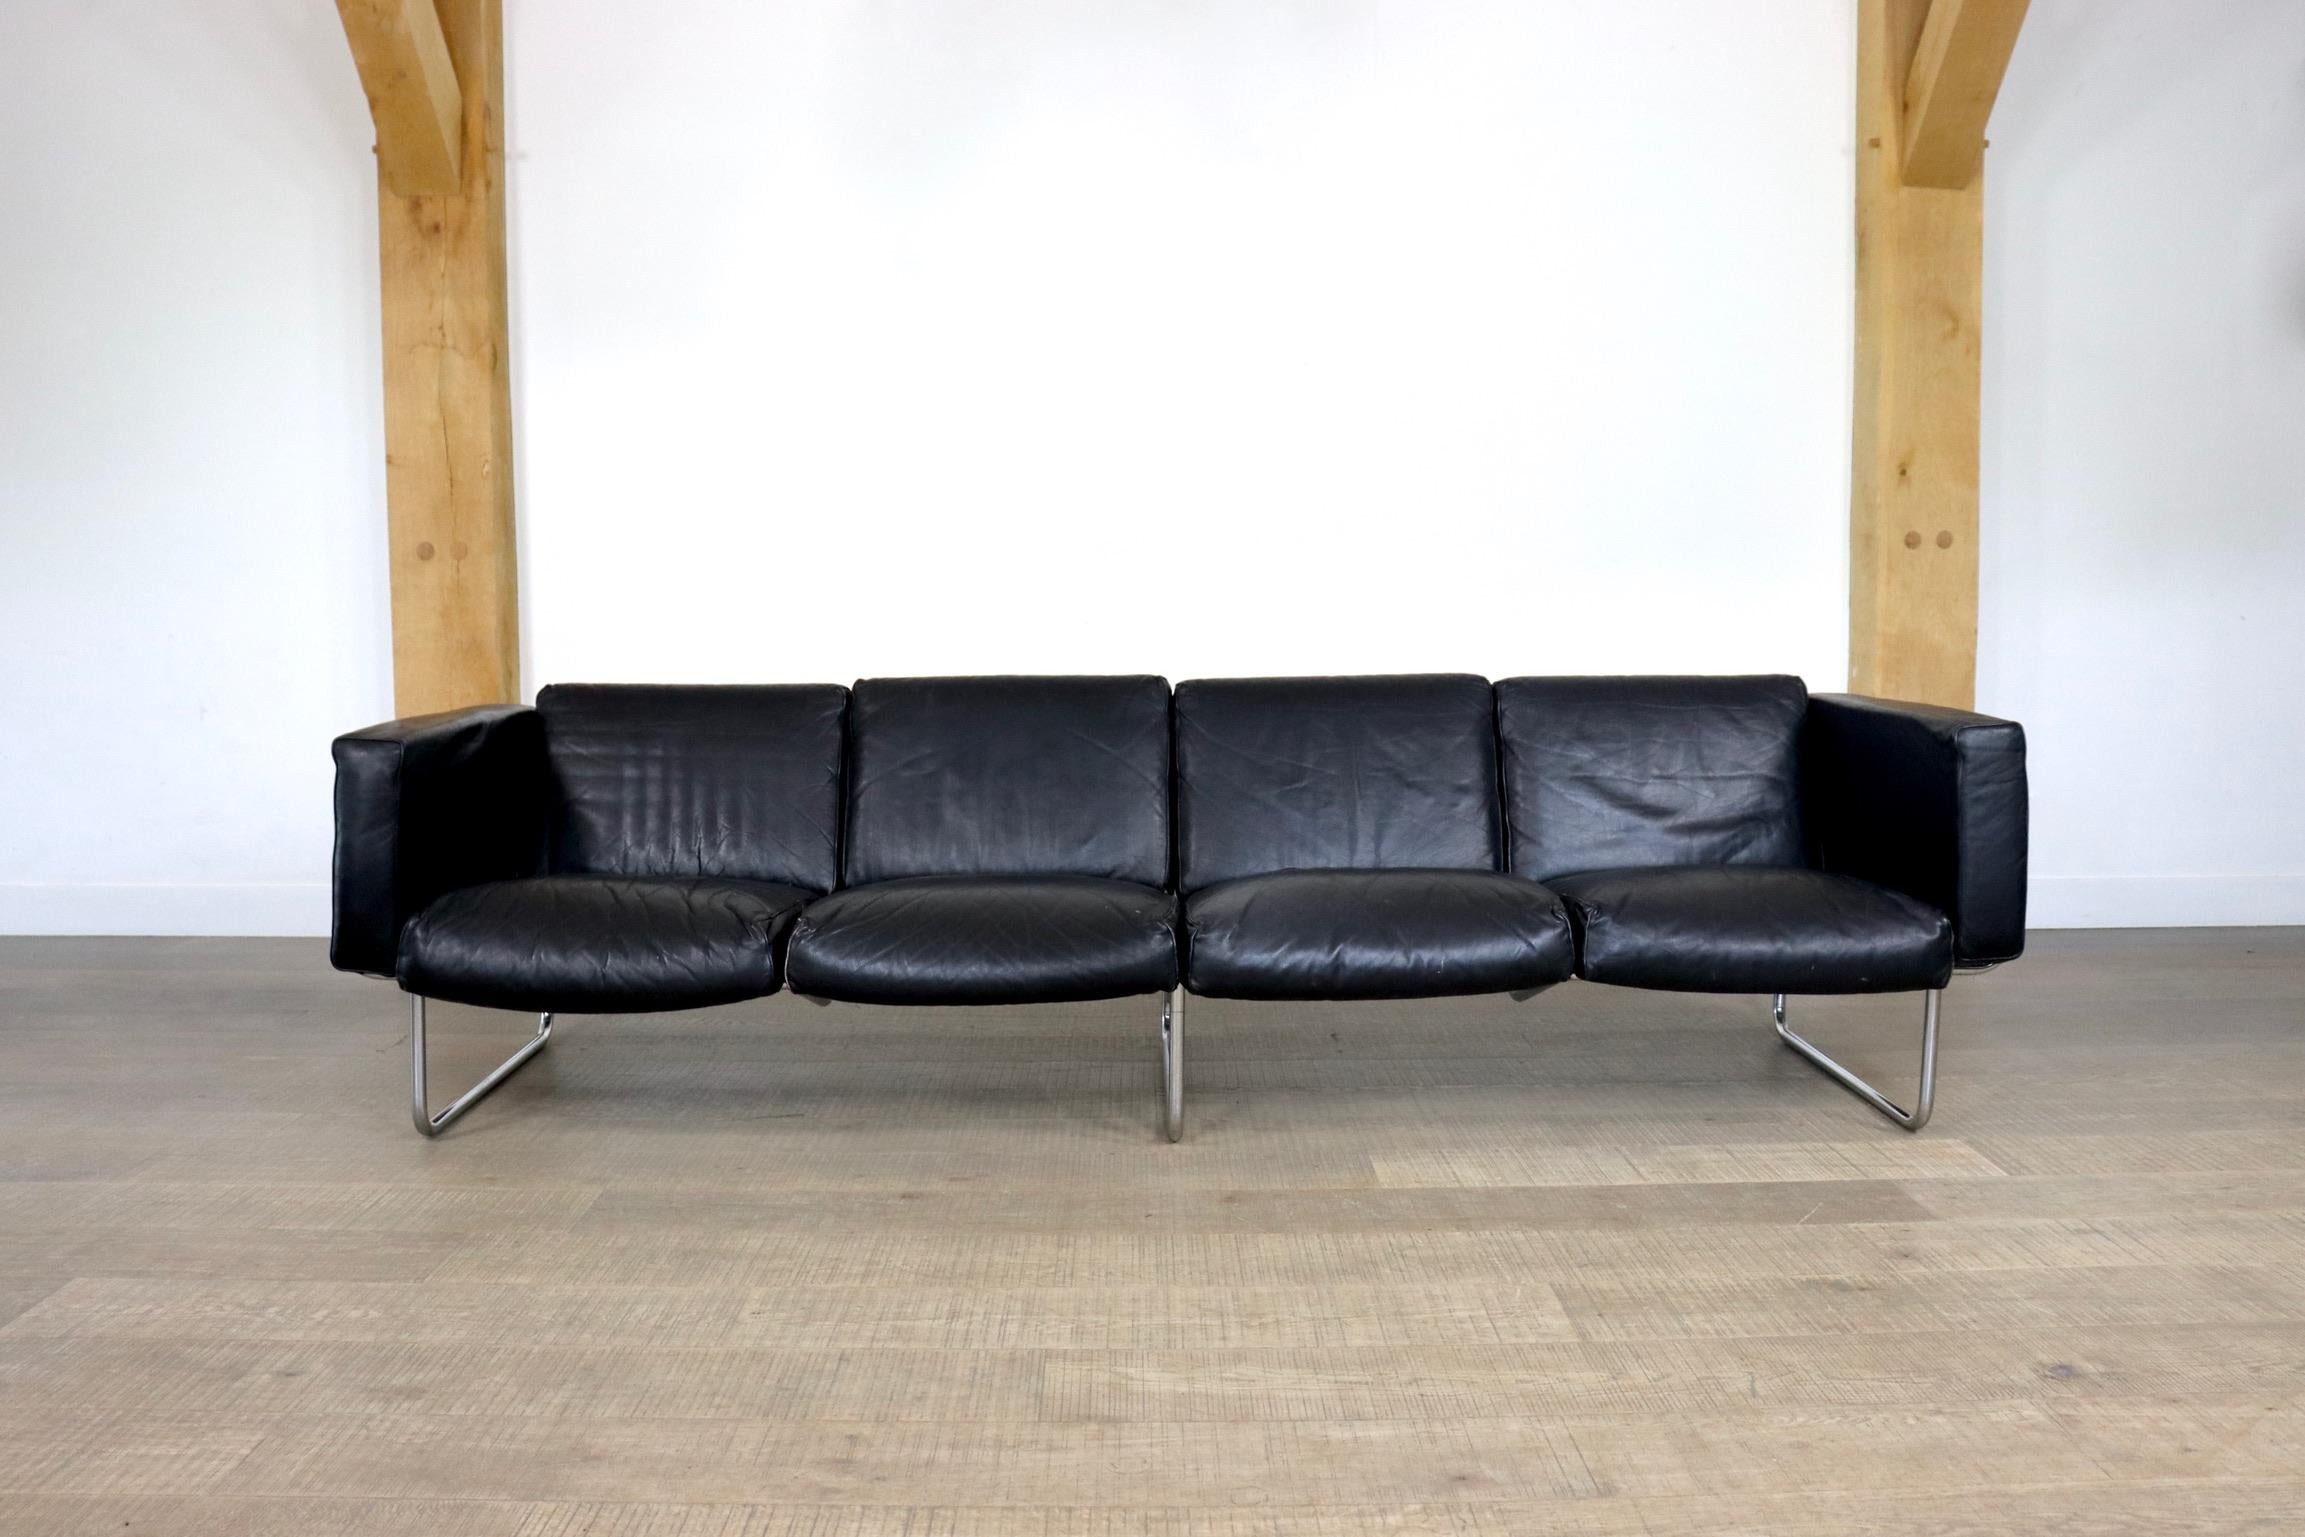 Rare four seater leather by Hans Eichenberger for Strässle, Switzerland 1970s. The stunning chrome tubular frame is supported by 34 springs in the back and 34 in the seating of the sofa for comfort. The original black leather chunky pillows carry a